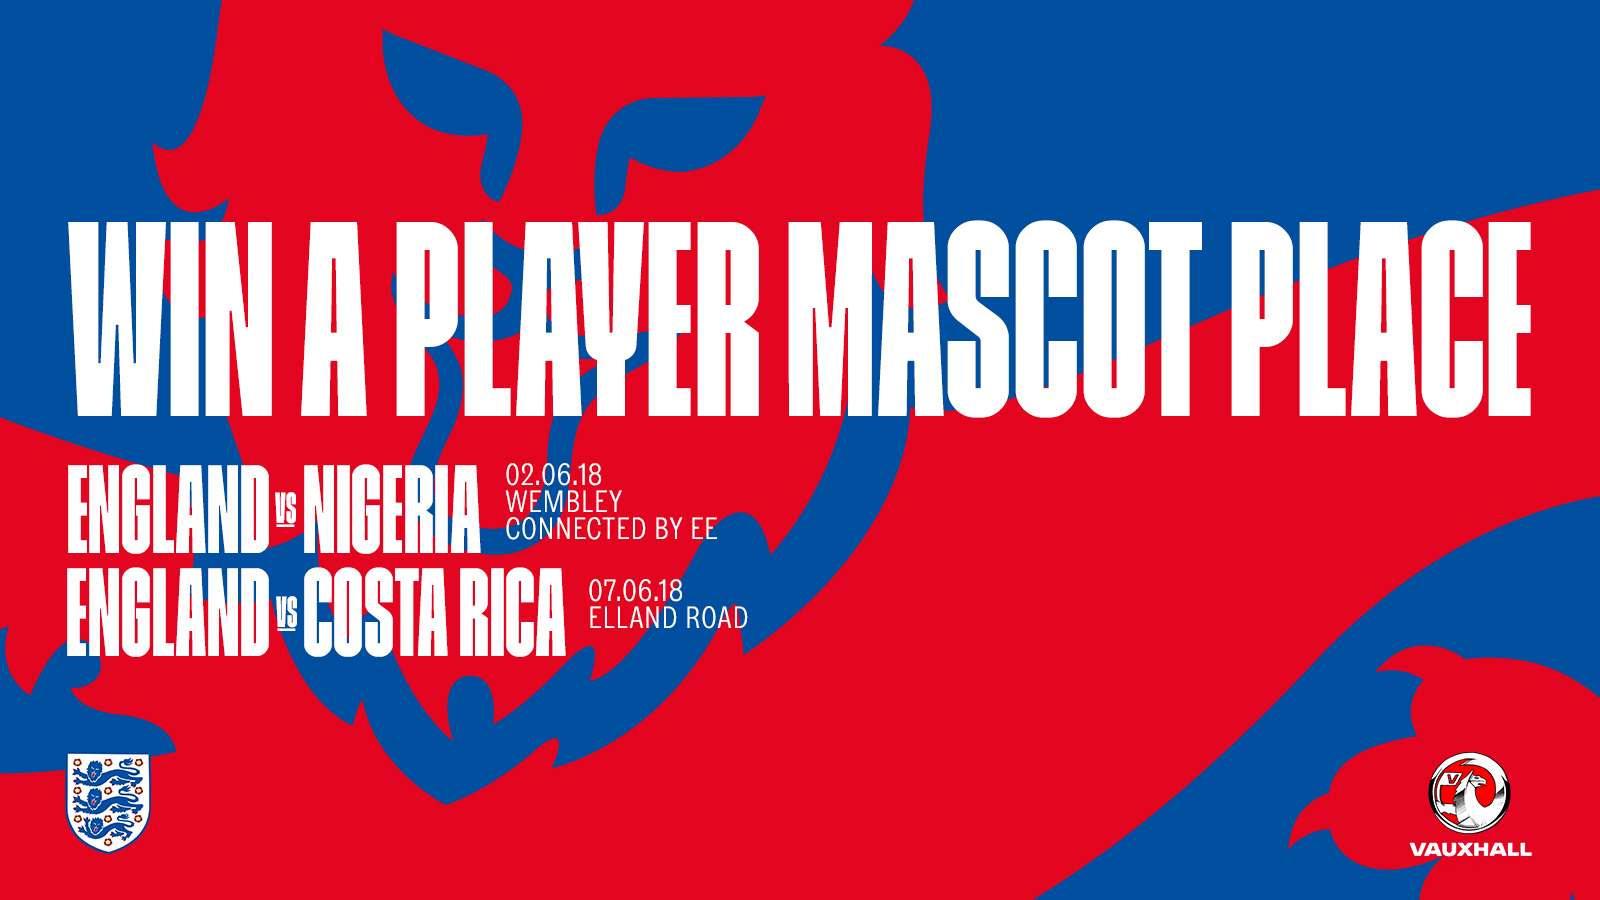 Win a Player Mascot place for Nigeria and Costa Rica